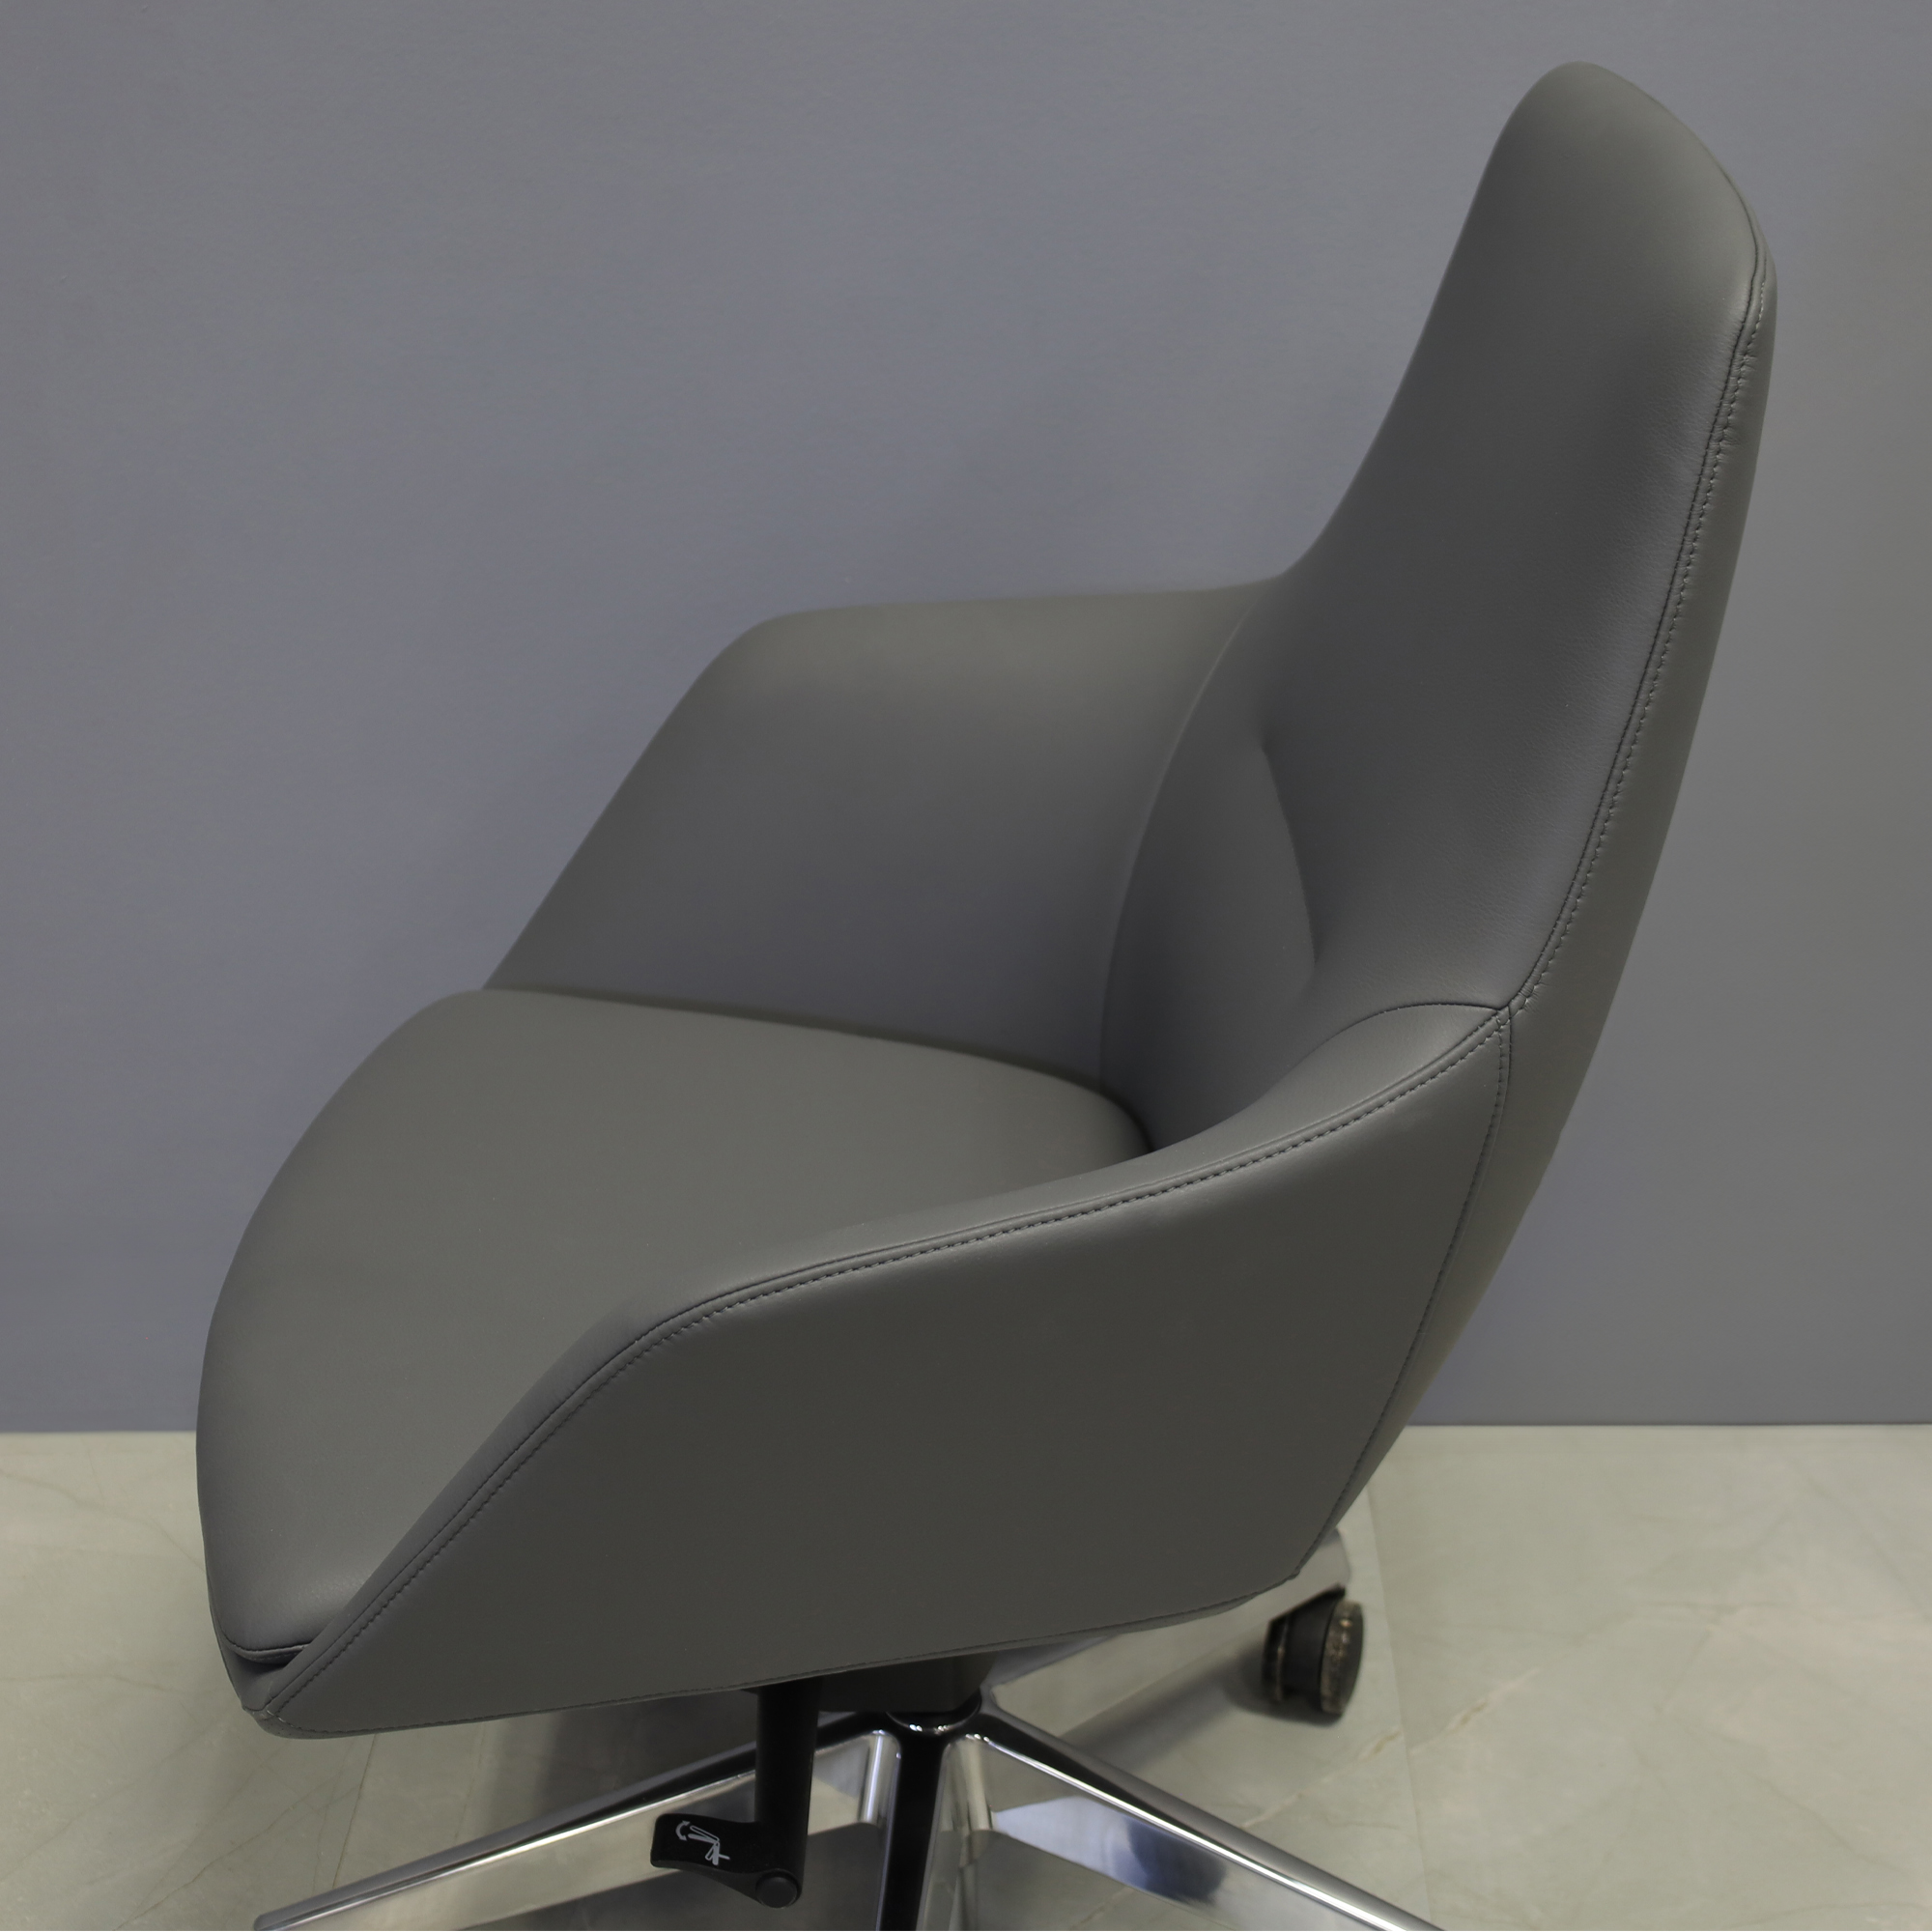 Silla Conference and Boardroom Chair in gray leatherette, shown here.